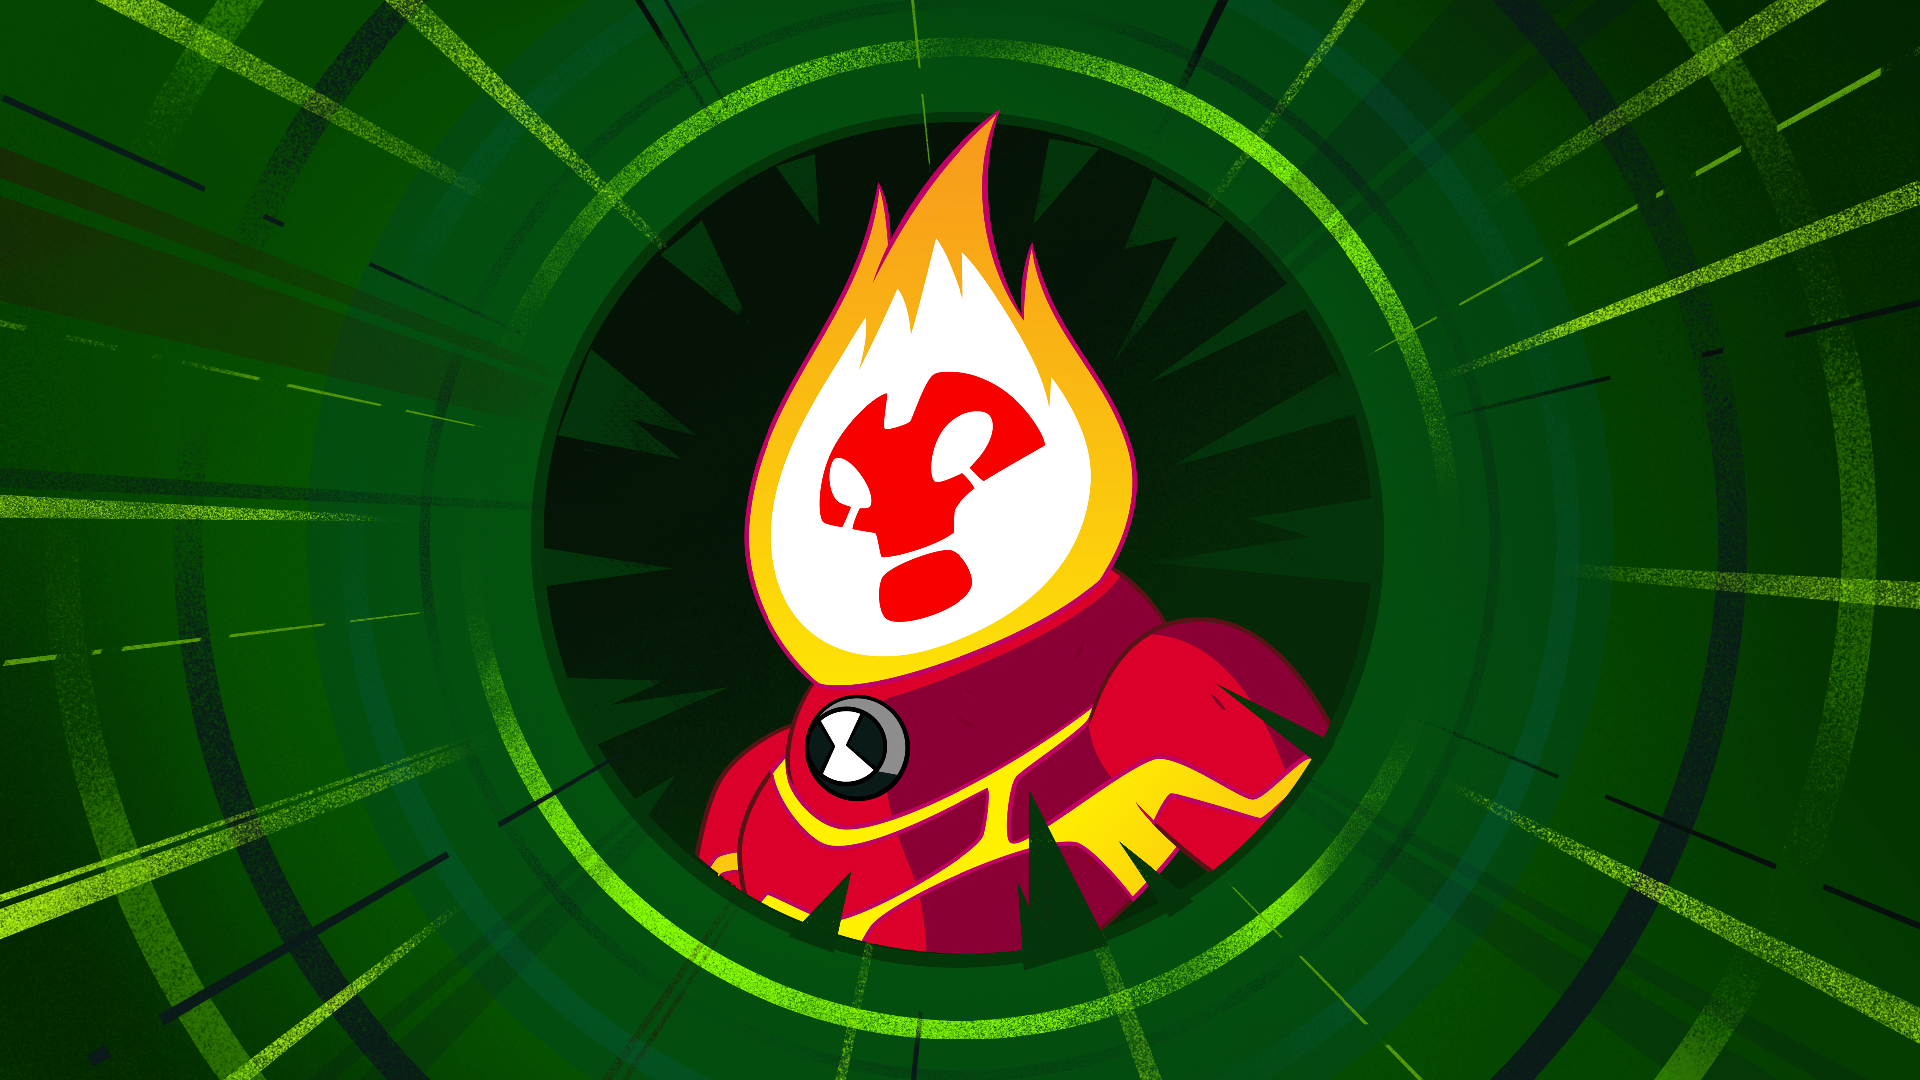 Icon for Turning up the Heat